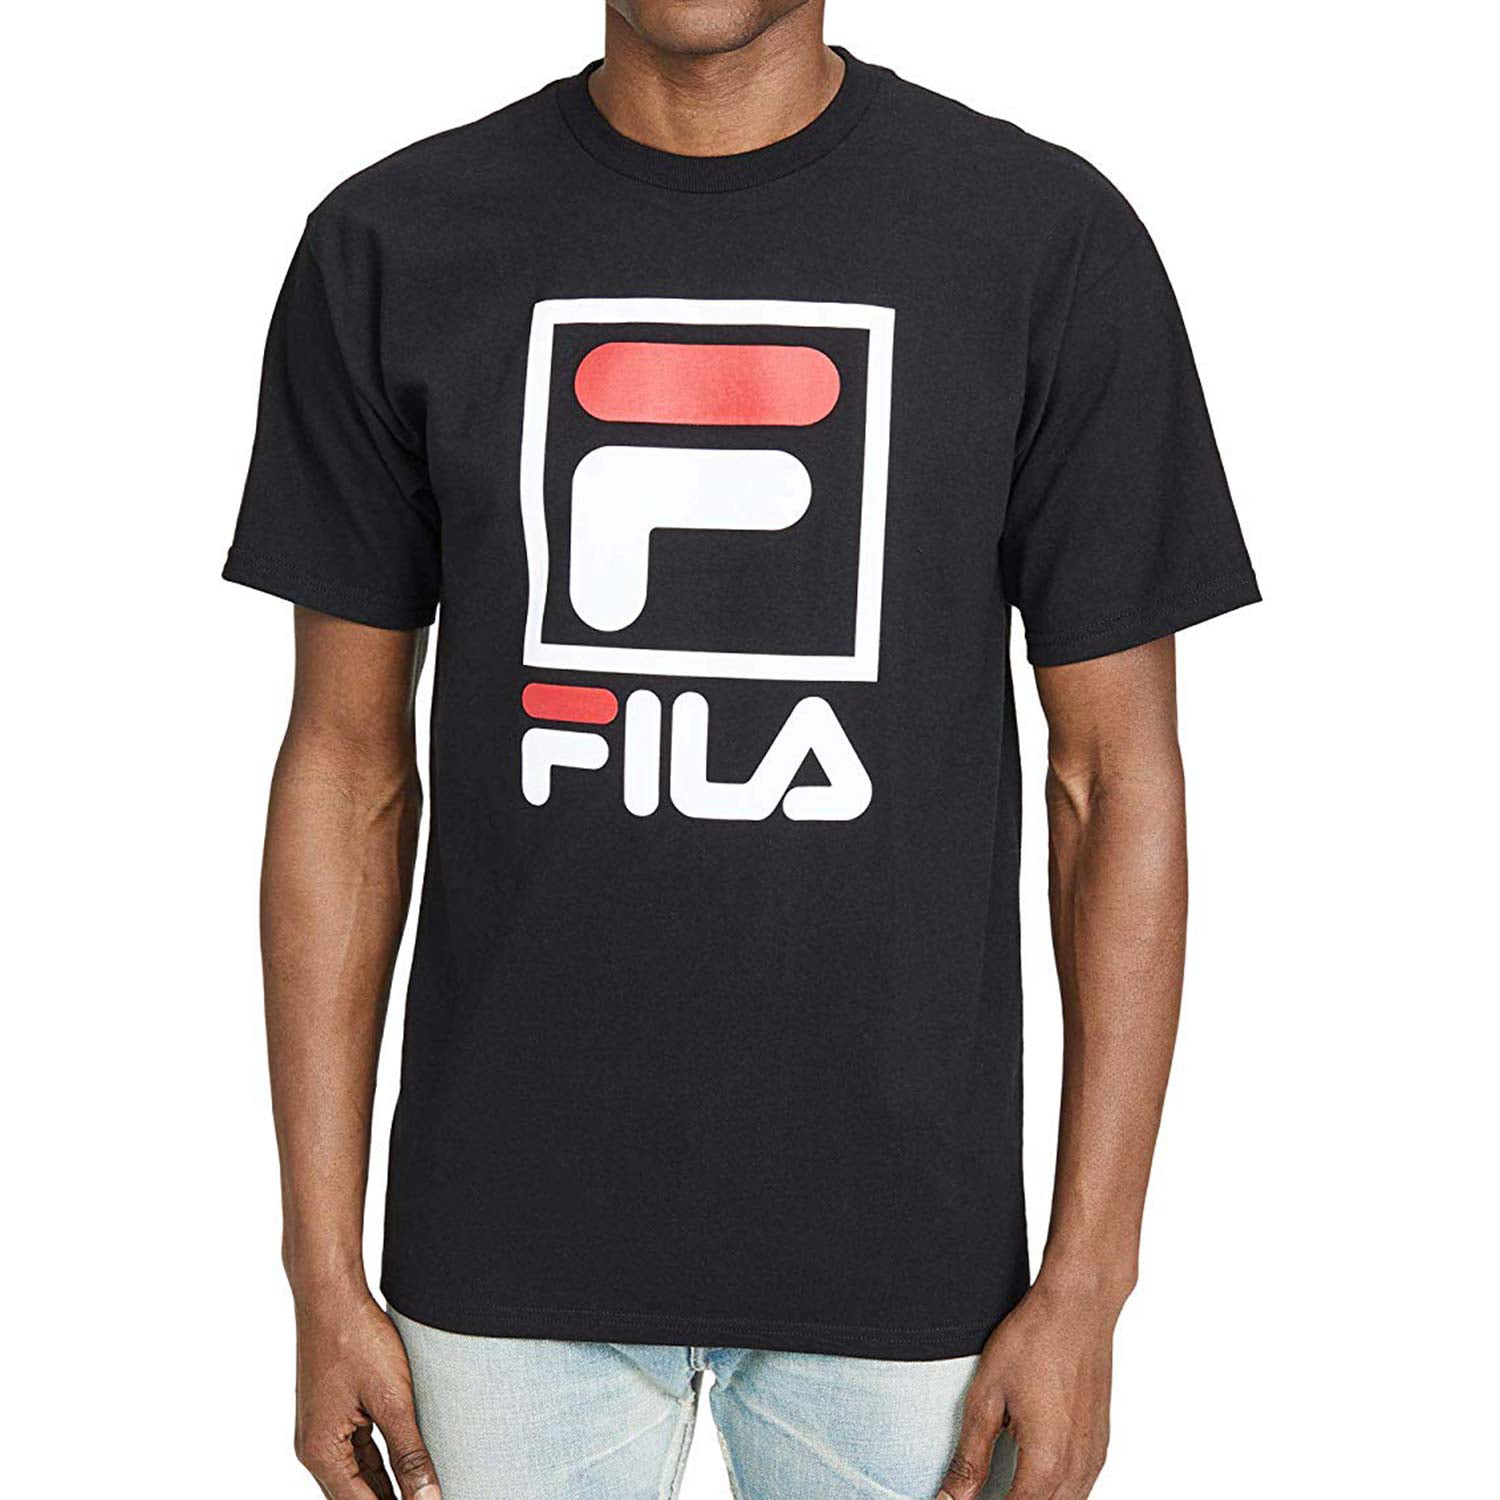 Fila Men's Stacked Tee Shirt Black-White-Chinese Red lm163xf4-002 ...